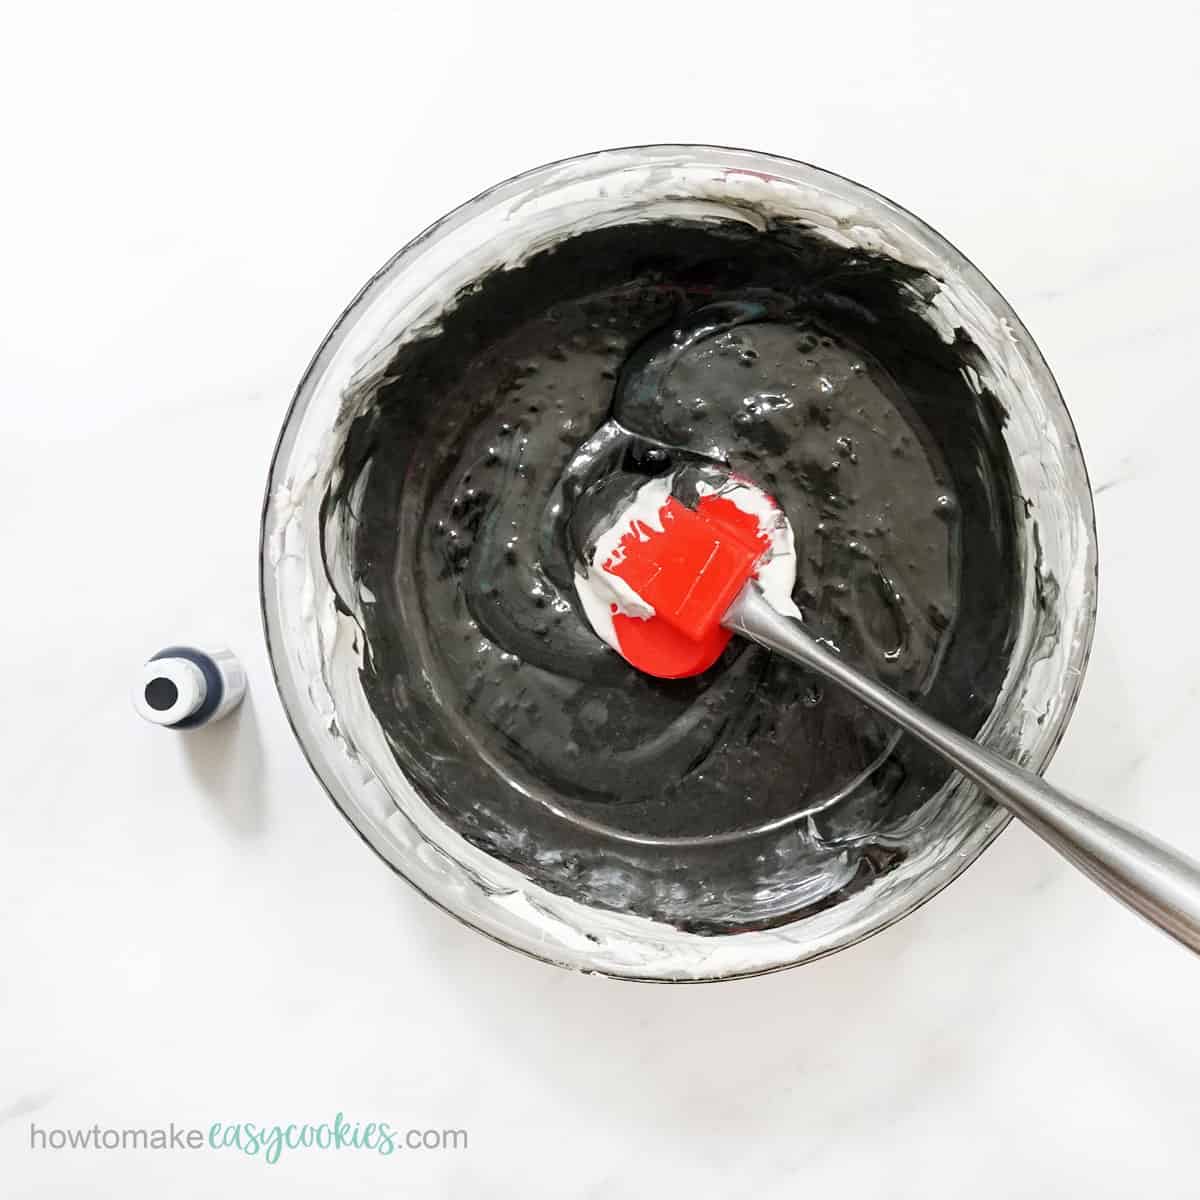 mixing black food coloring into melted marshmallows